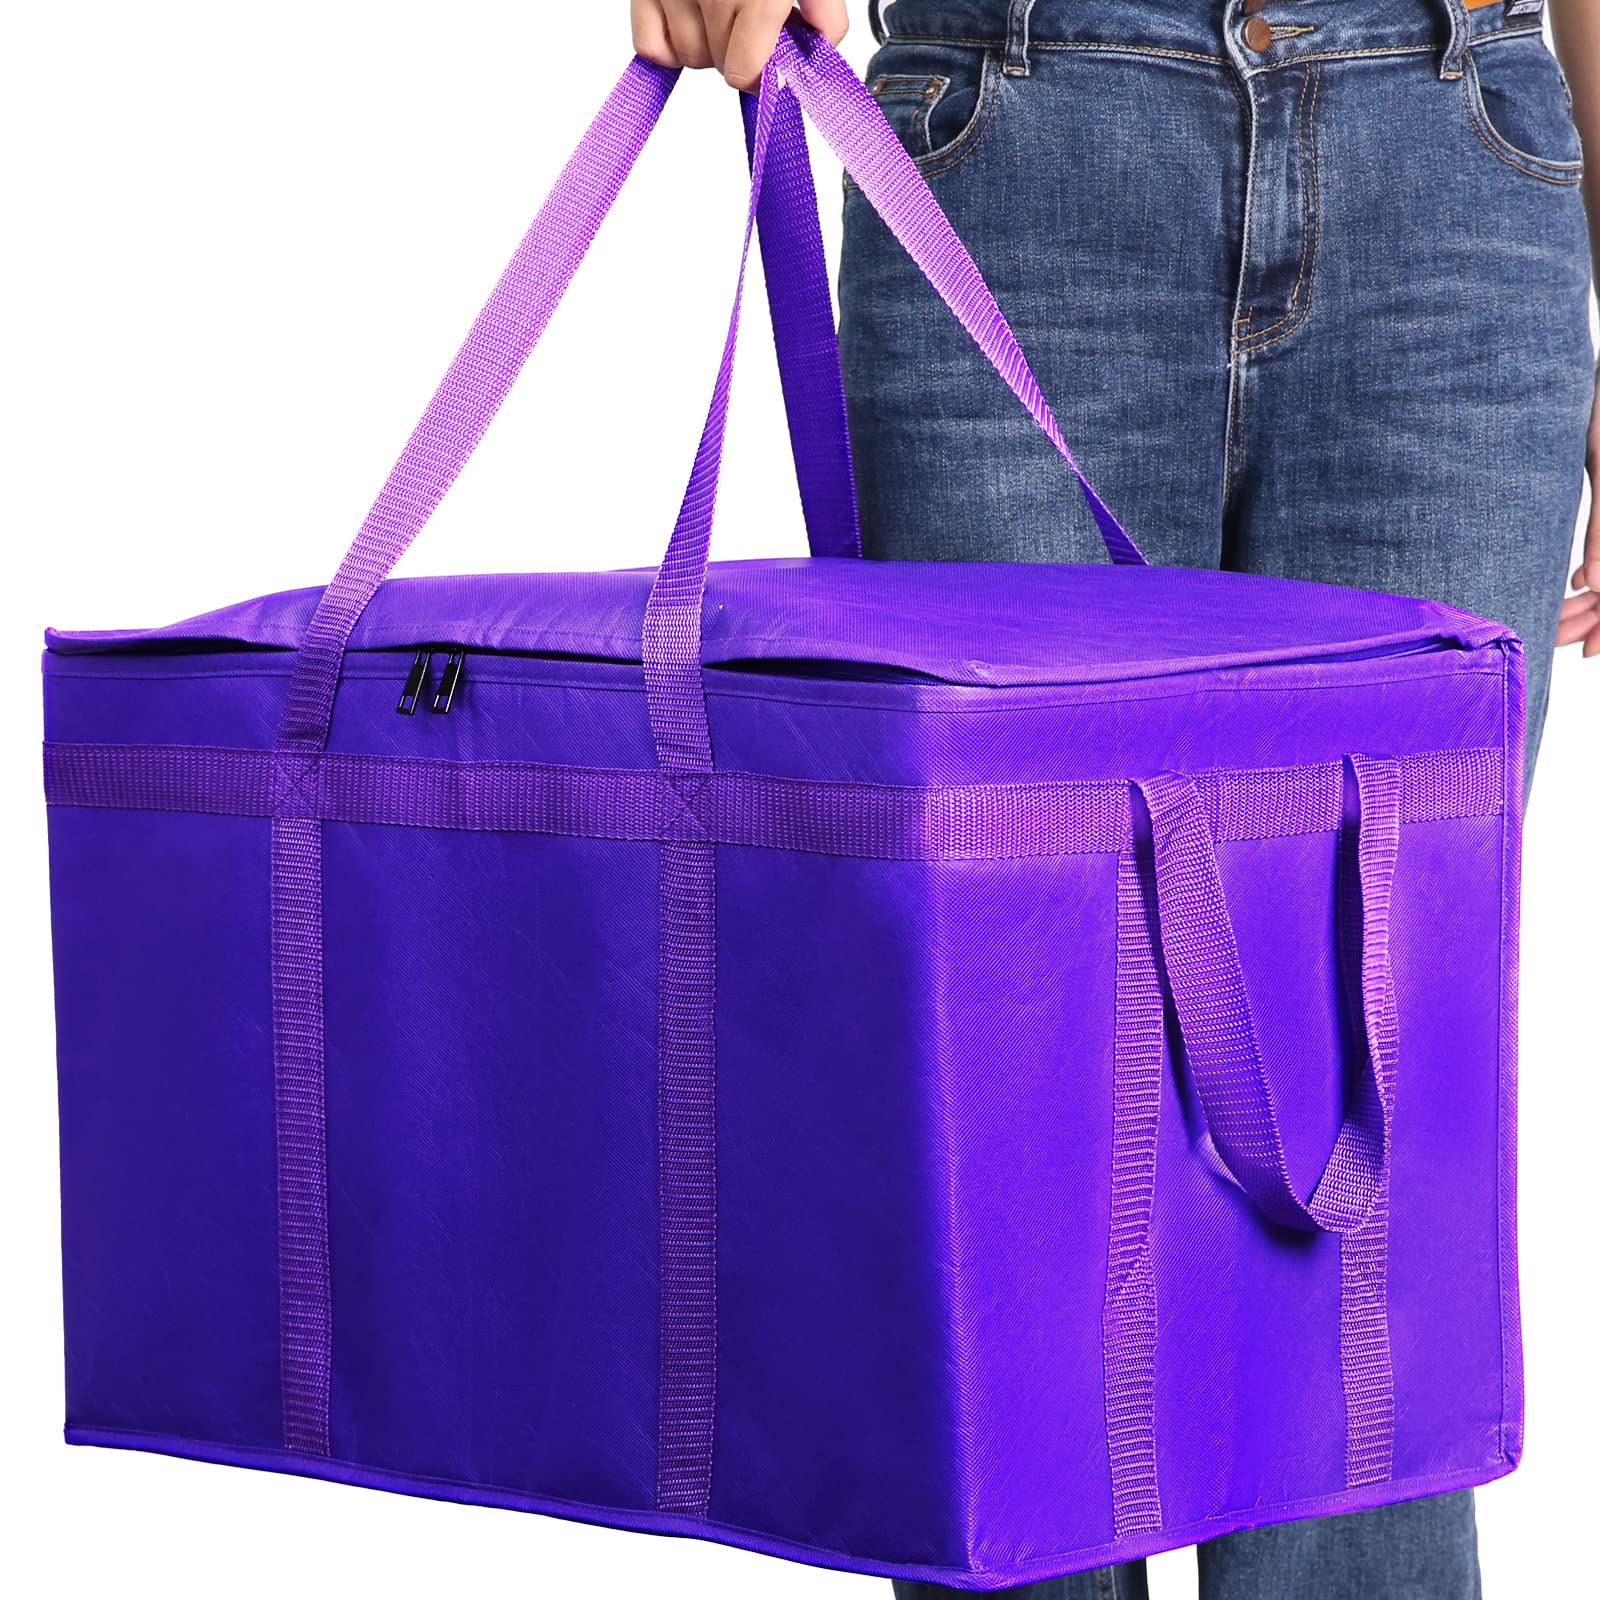 Musbus 1 Pack Purple Extra Large Xxxl Insulated Food Delivery Bag Cooler Bags Keep Food Warm Catering Therma For Doordash Cateri